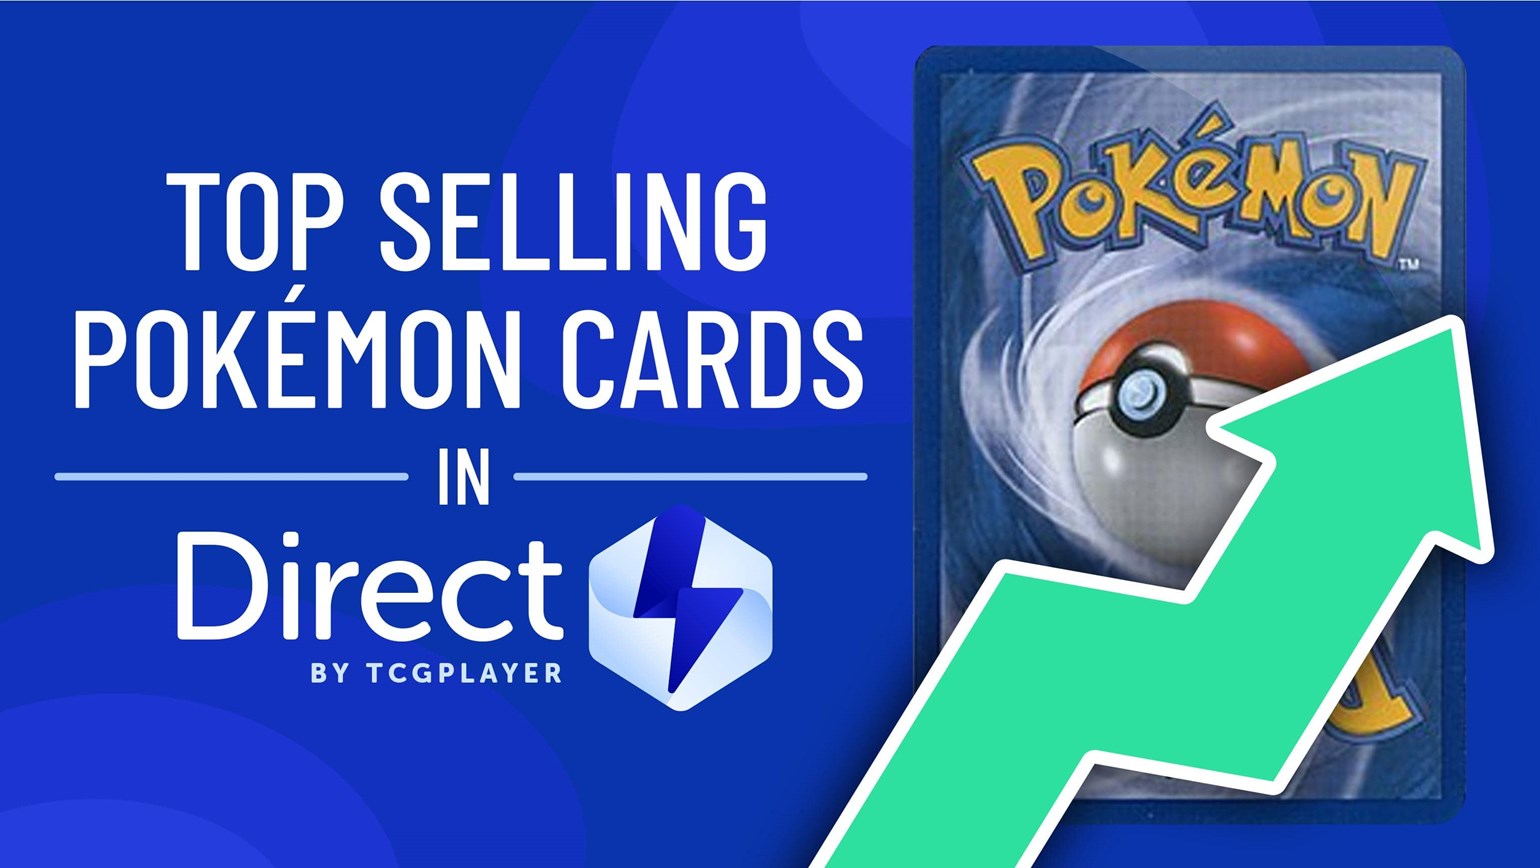 July Top Selling Pokémon Cards in Direct by TCGplayer